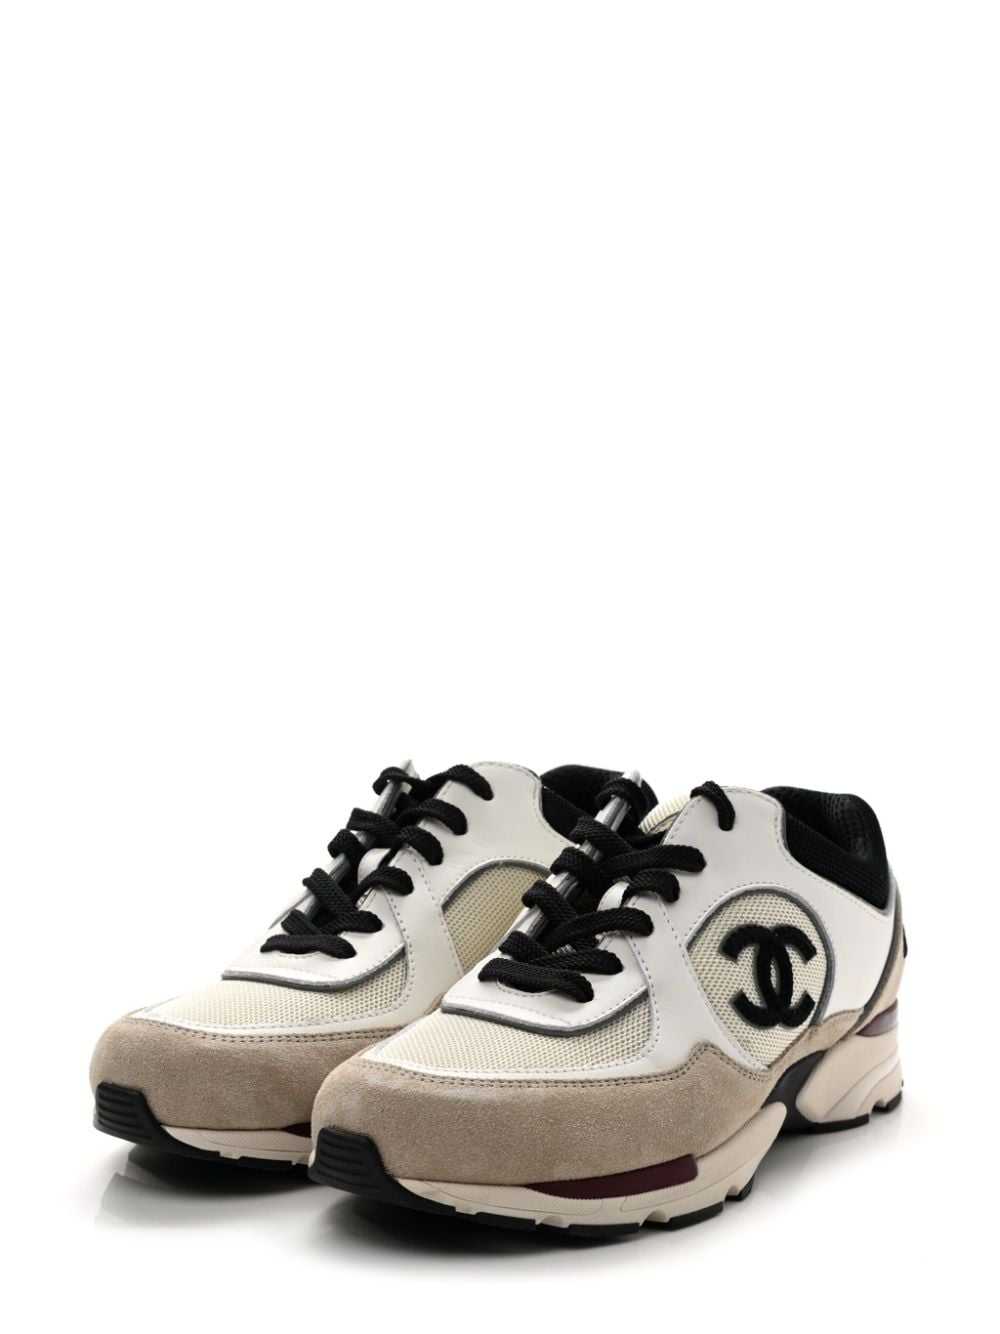 CHANEL Pre-Owned CC suede panelled sneakers - Neu… - image 3